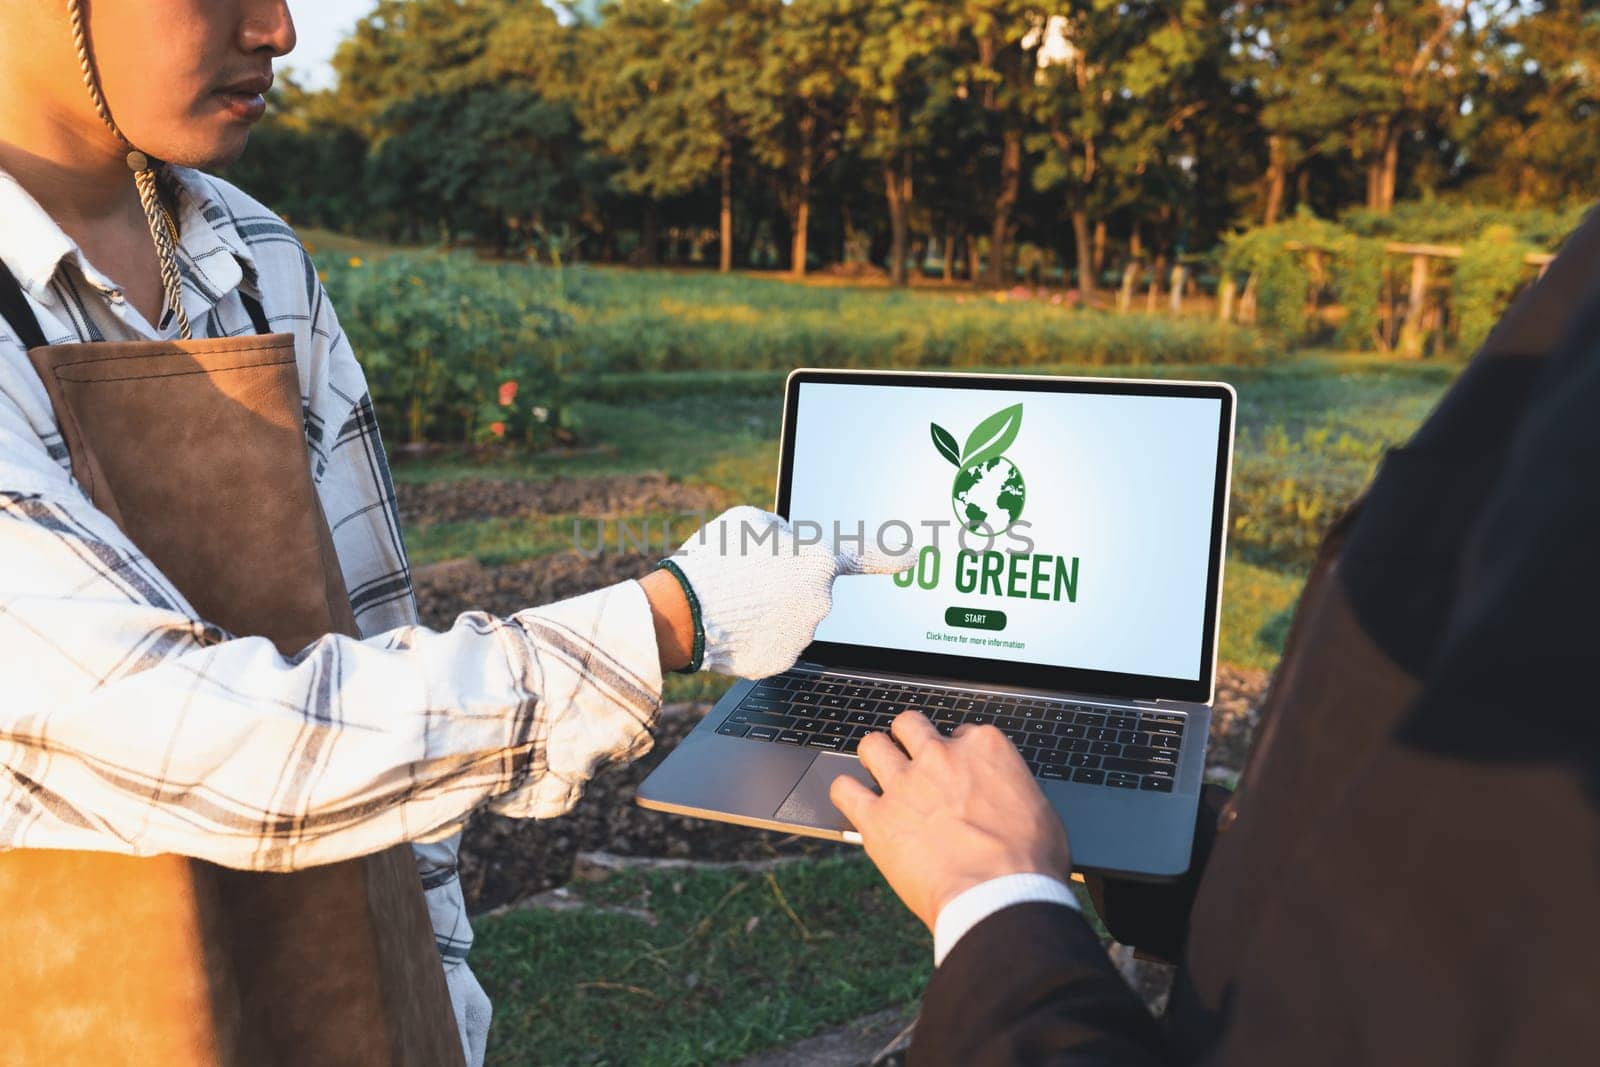 Eco-business company empower farmer with eco-friendly farming practice. Gyre by biancoblue